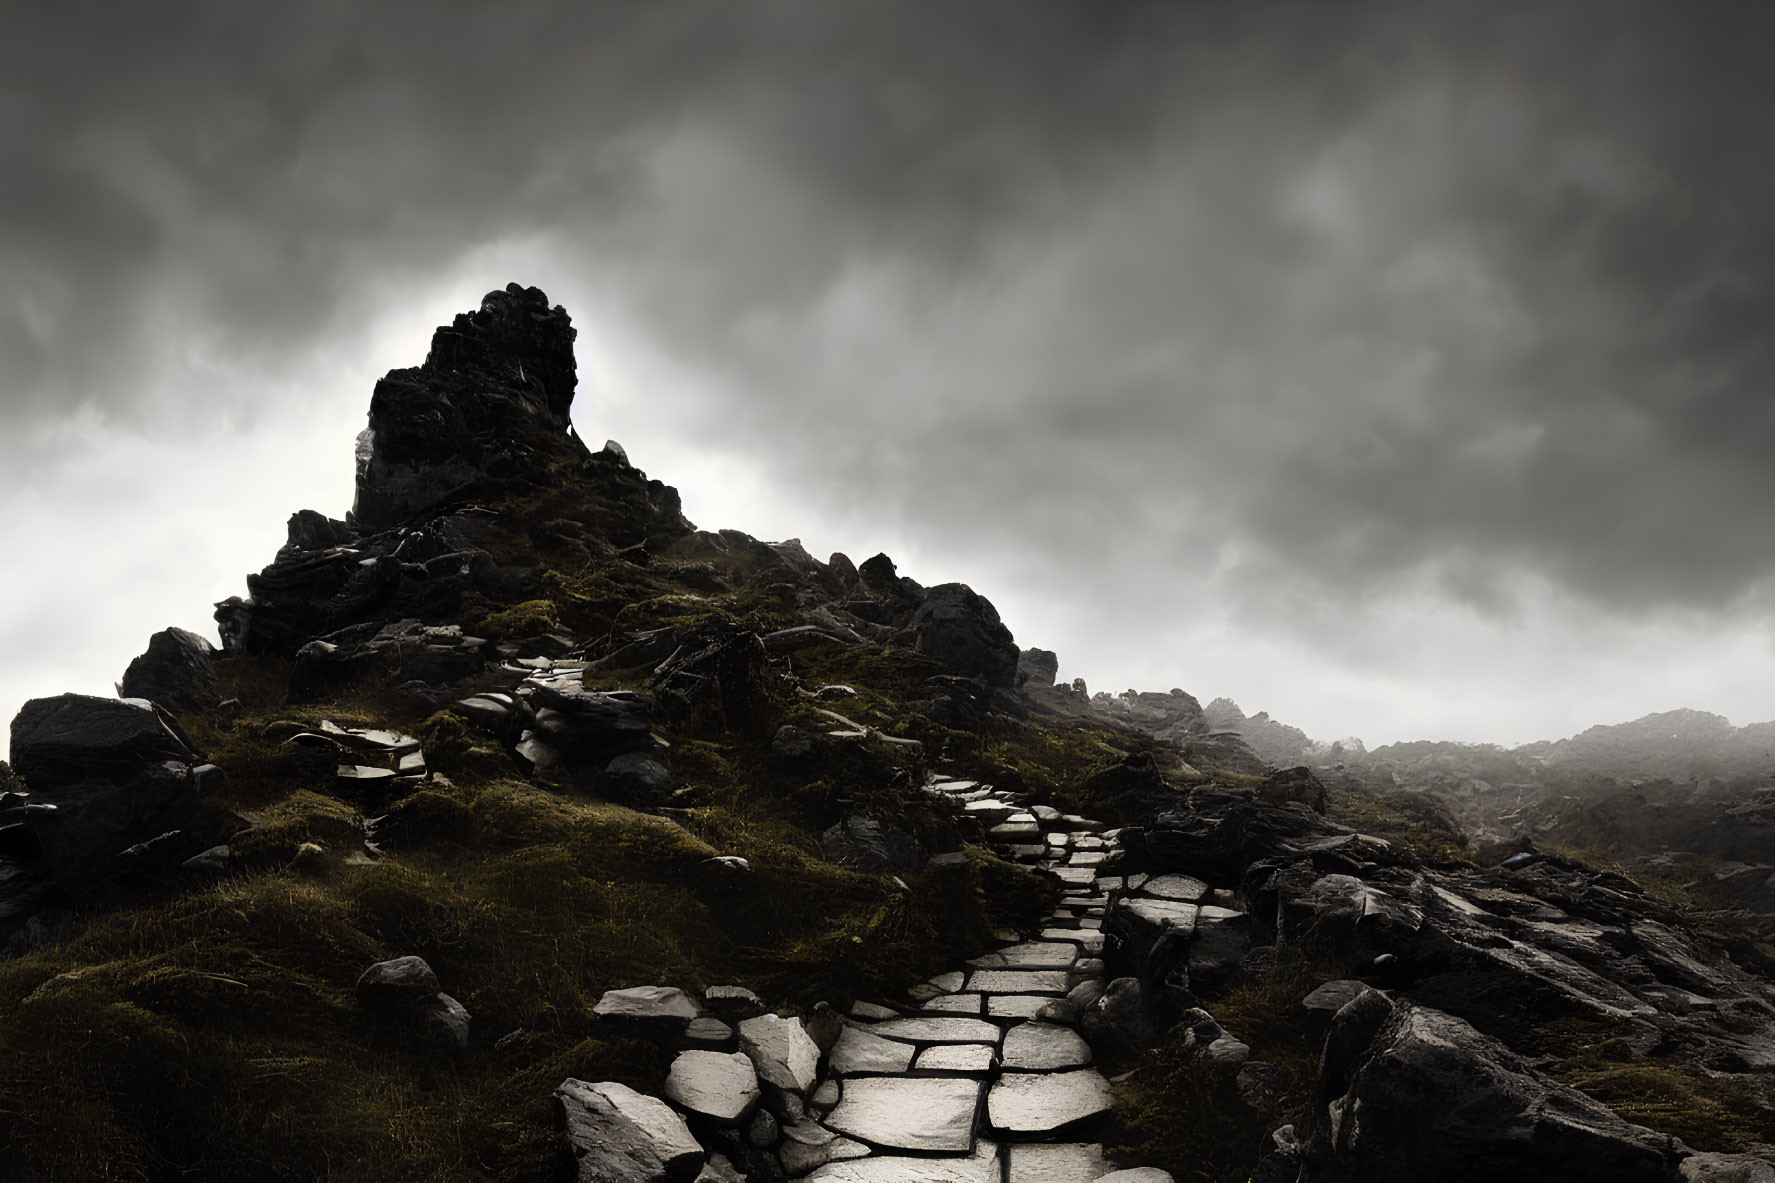 Dramatic mountain scene with rocky path and towering crag